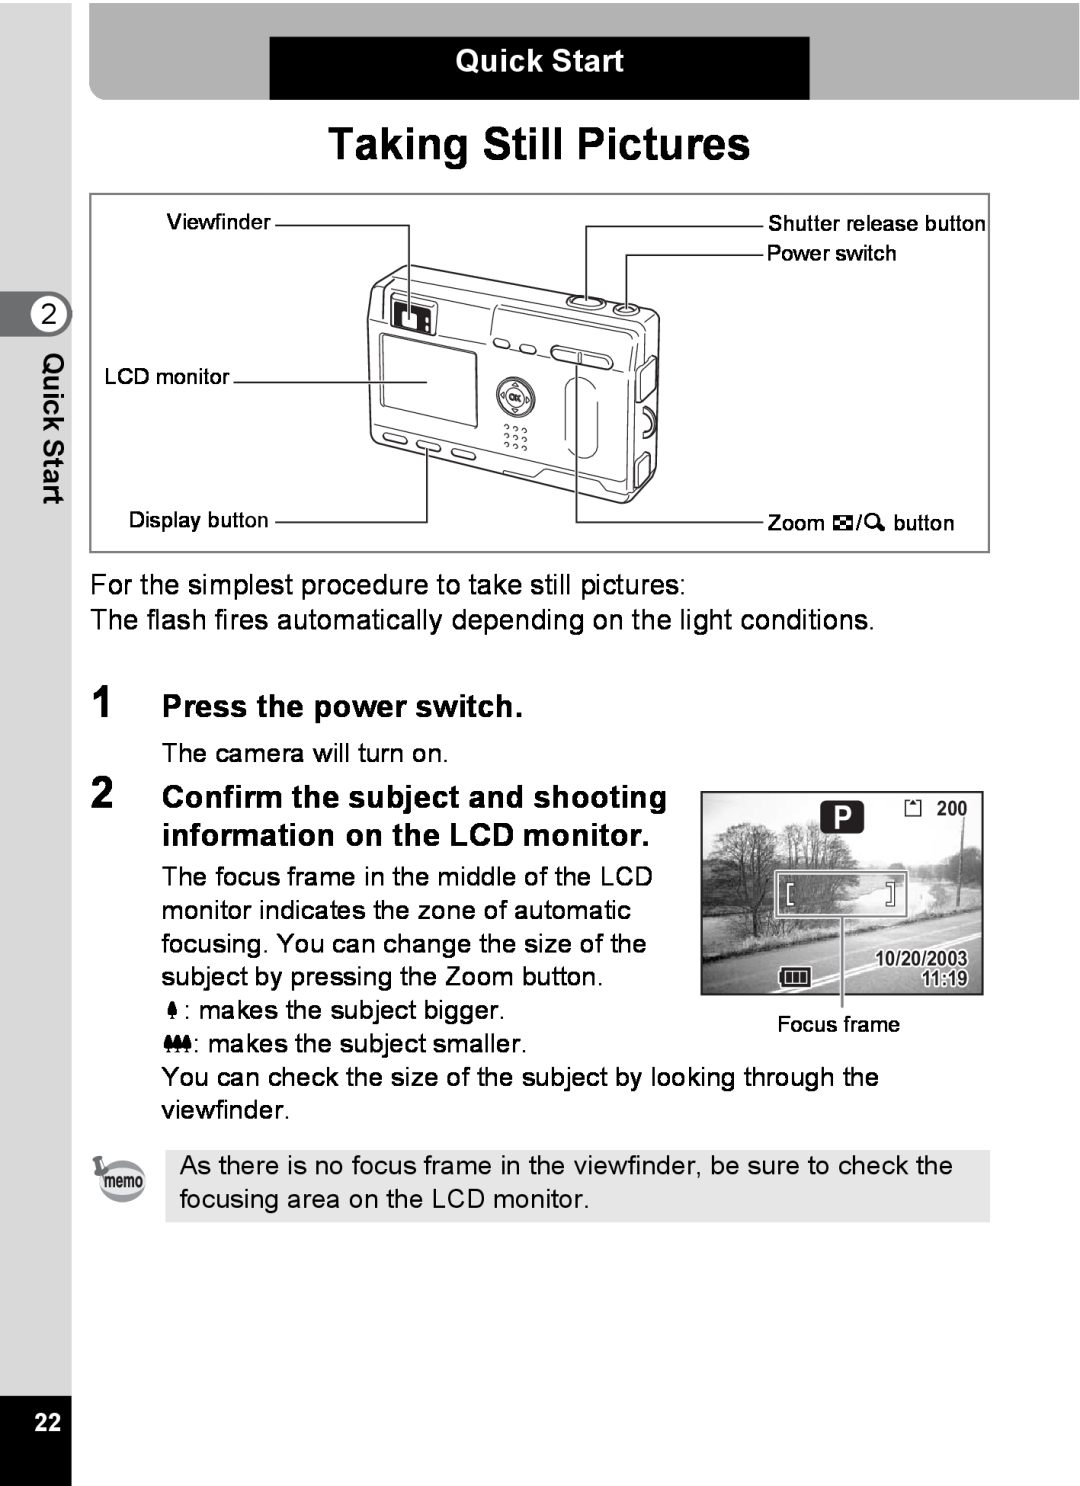 Pentax S4 Taking Still Pictures, Quick Start, Press the power switch, For the simplest procedure to take still pictures 